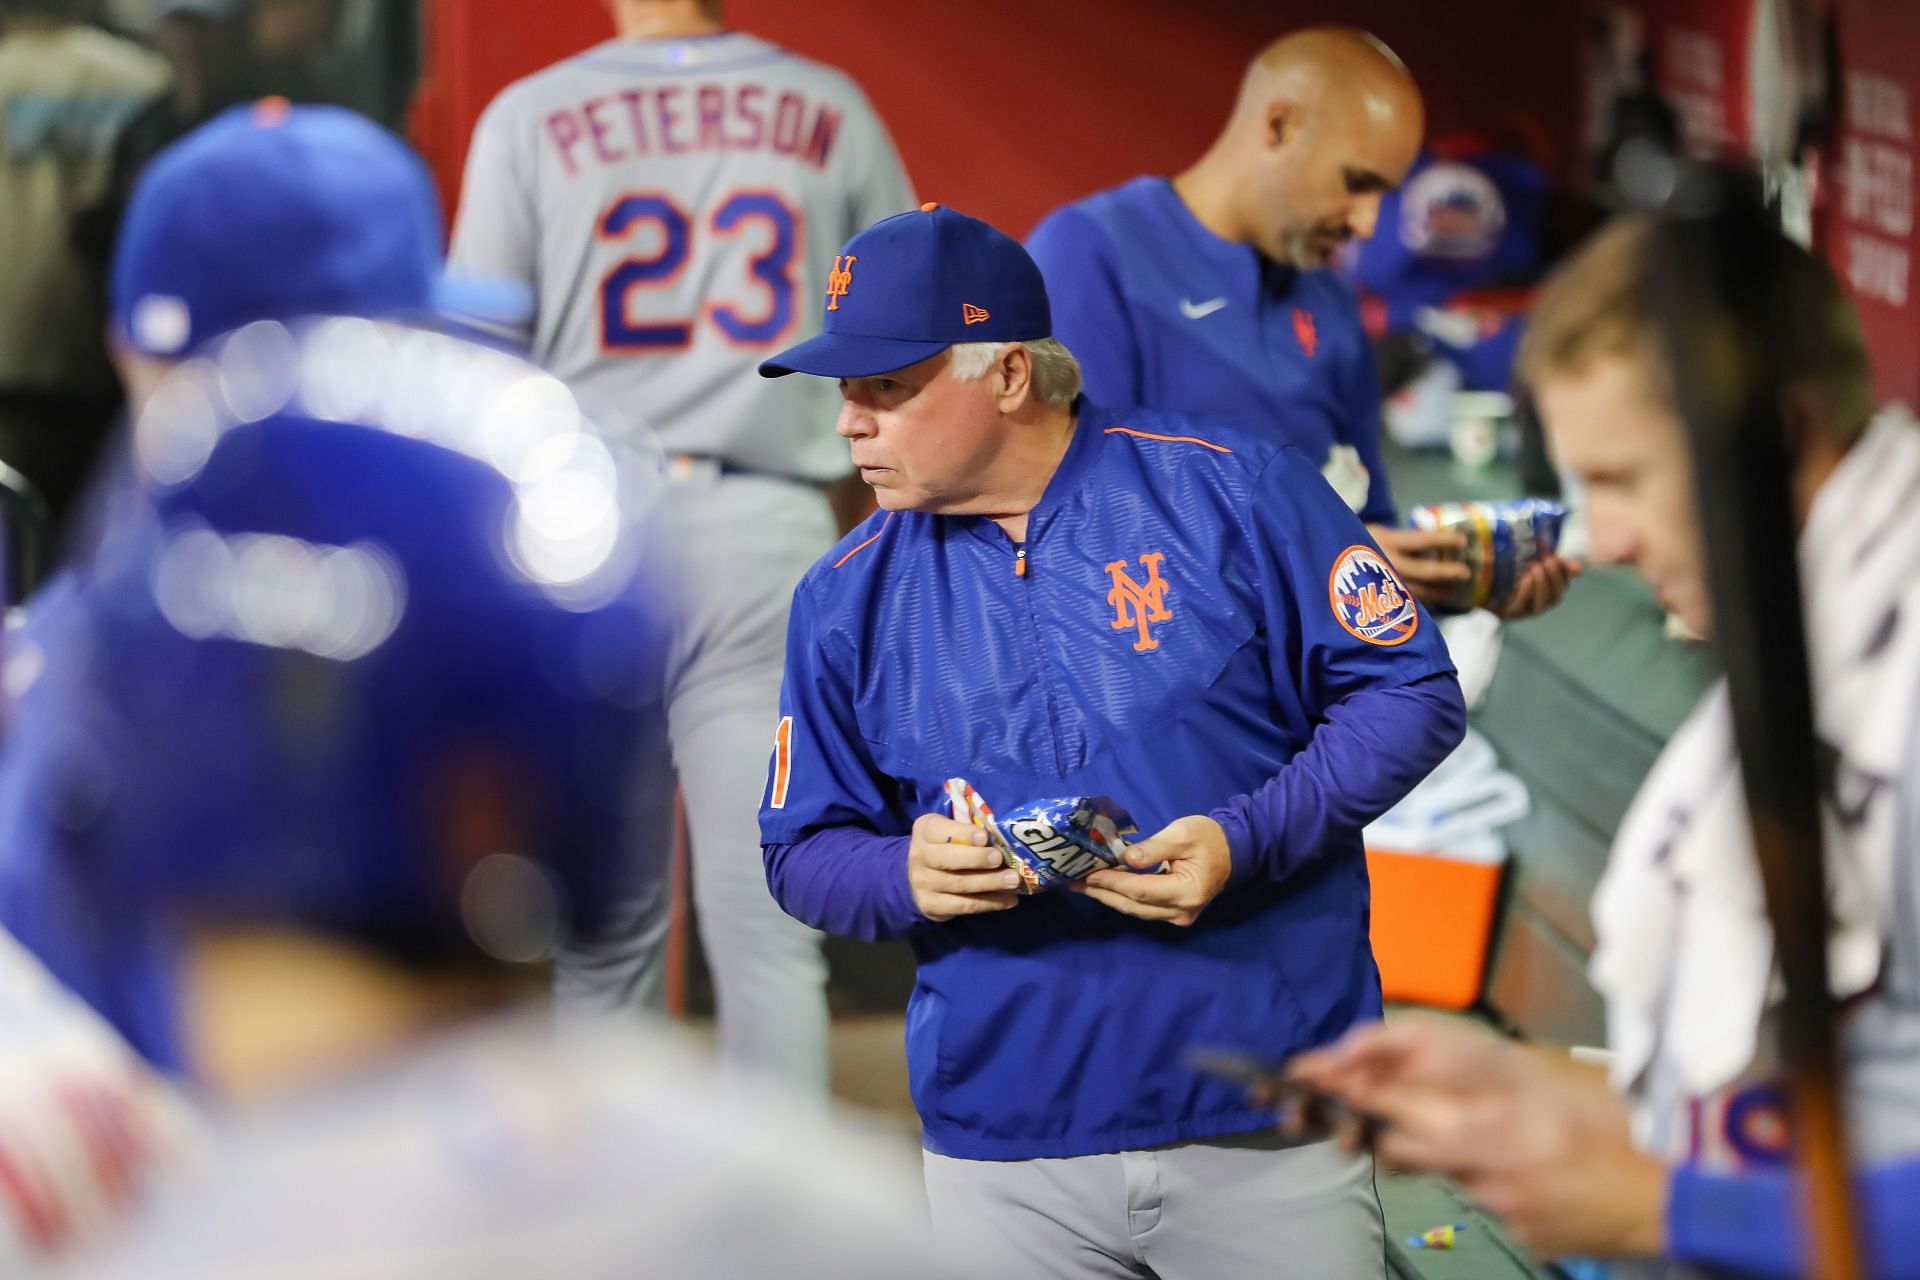 New York Mets manager had the most unusual response to being asked